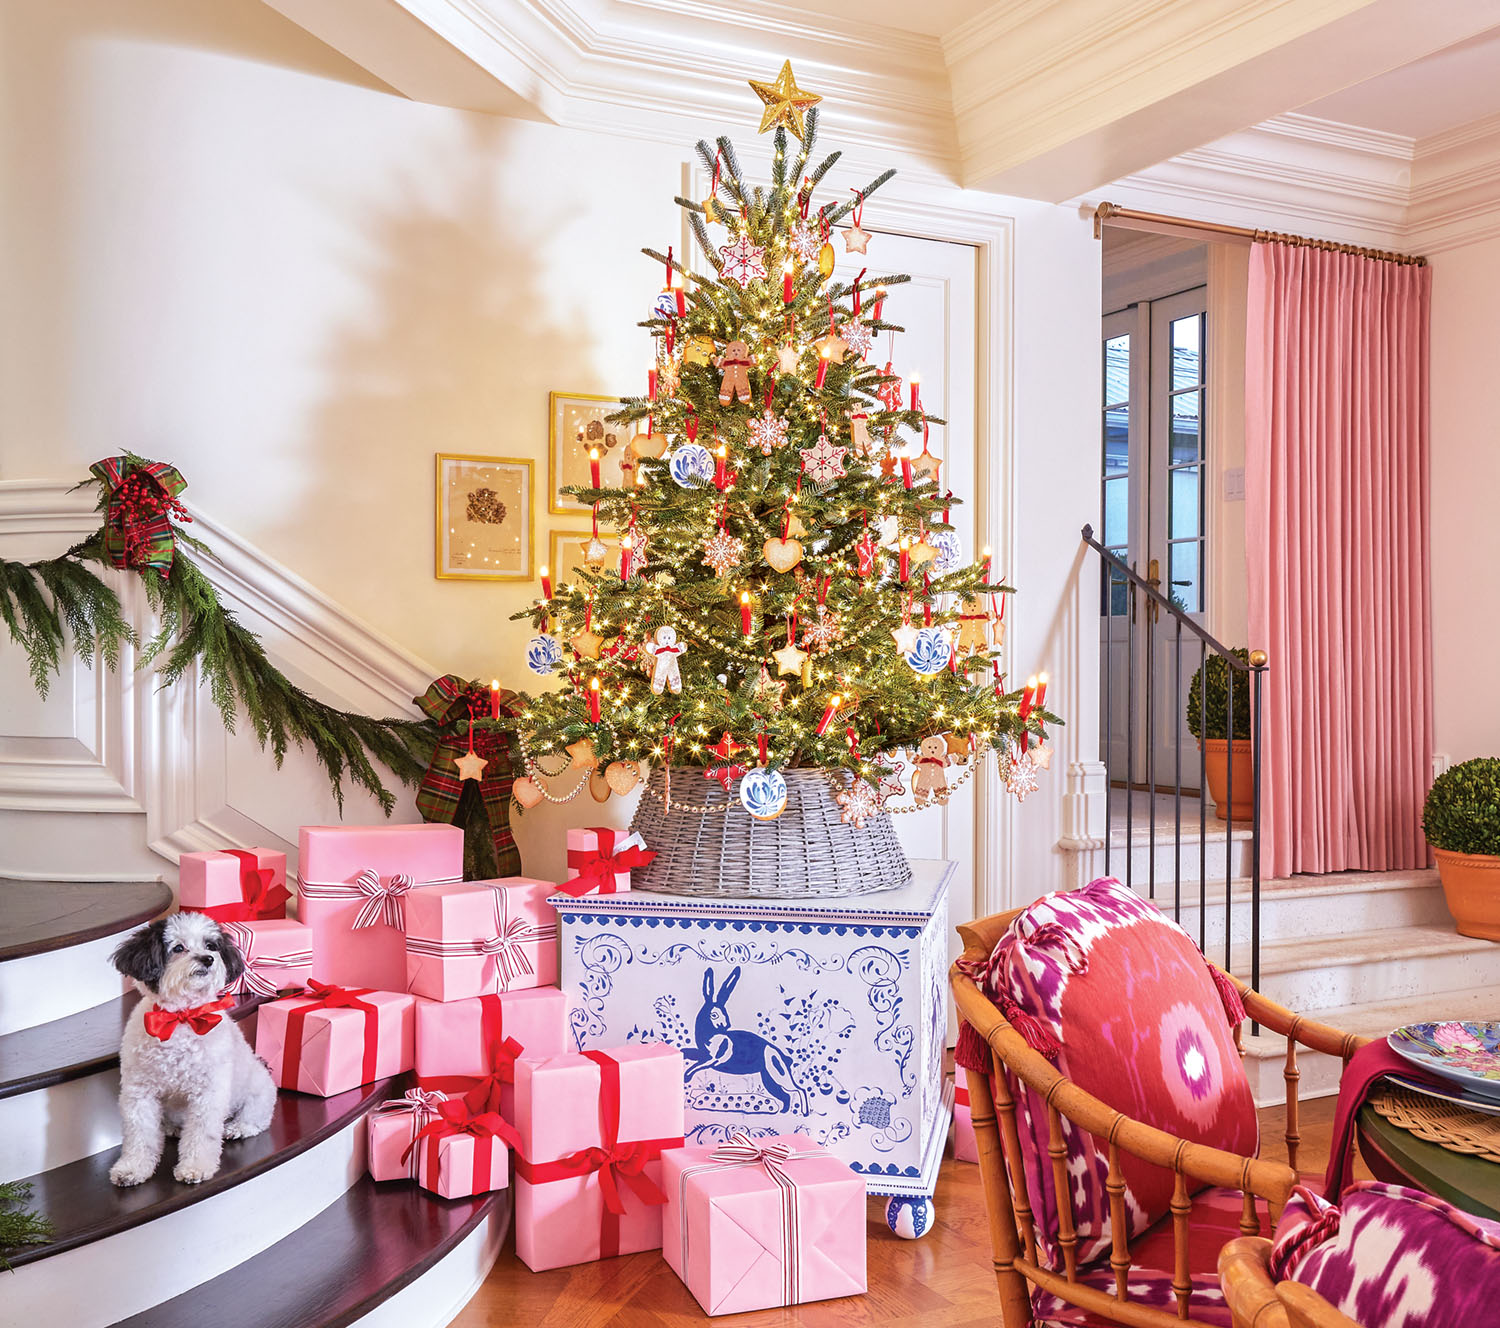 Christmas presents wrapped in pink paper and tied with red or silver ribbon are stacked on the stairs beside a tabletop tree set on a blue-and-white toy chest.